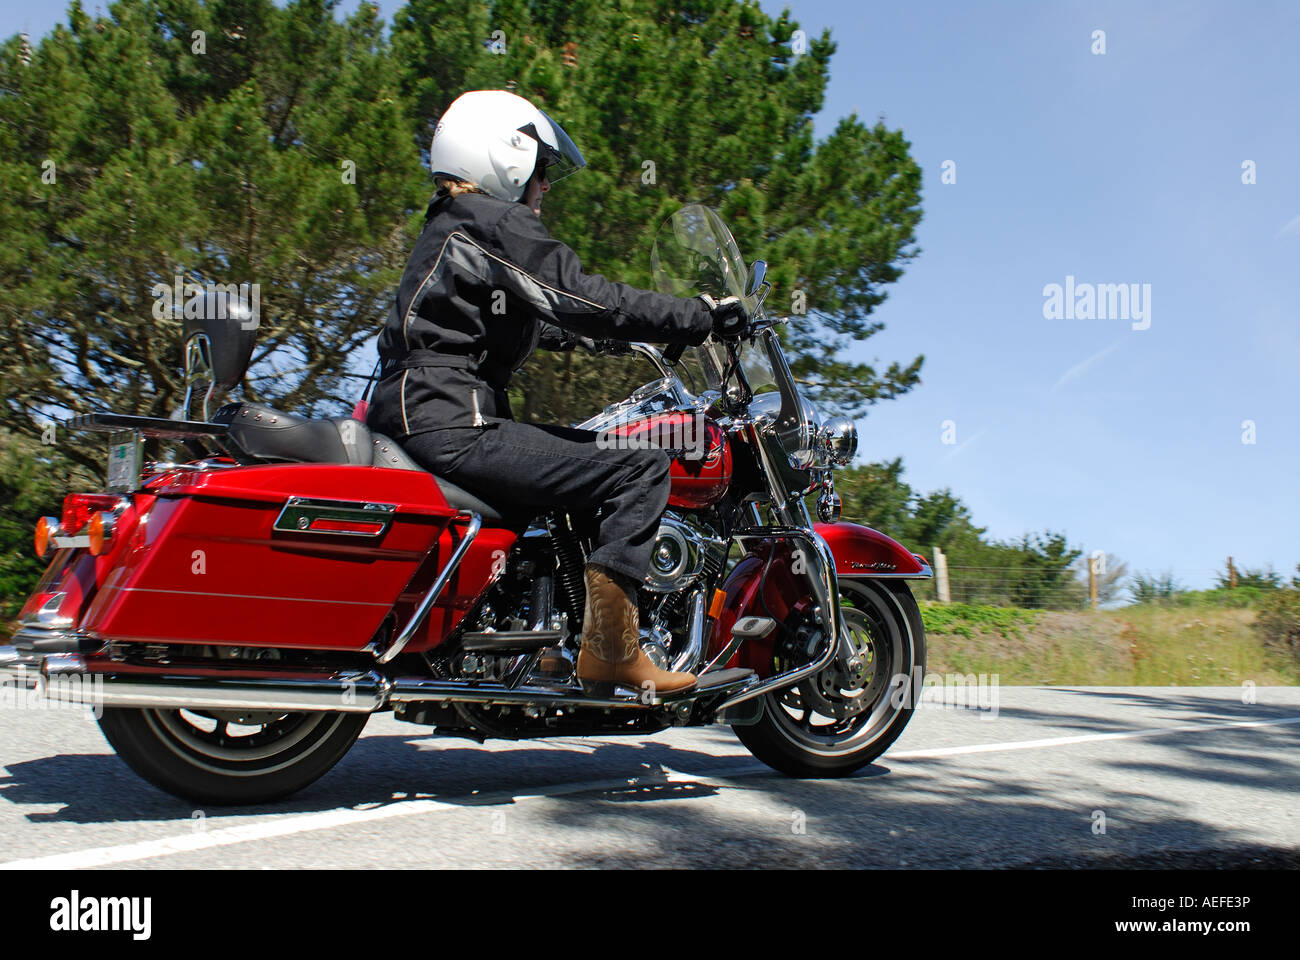 The Age Of Driving A Motorcycle At